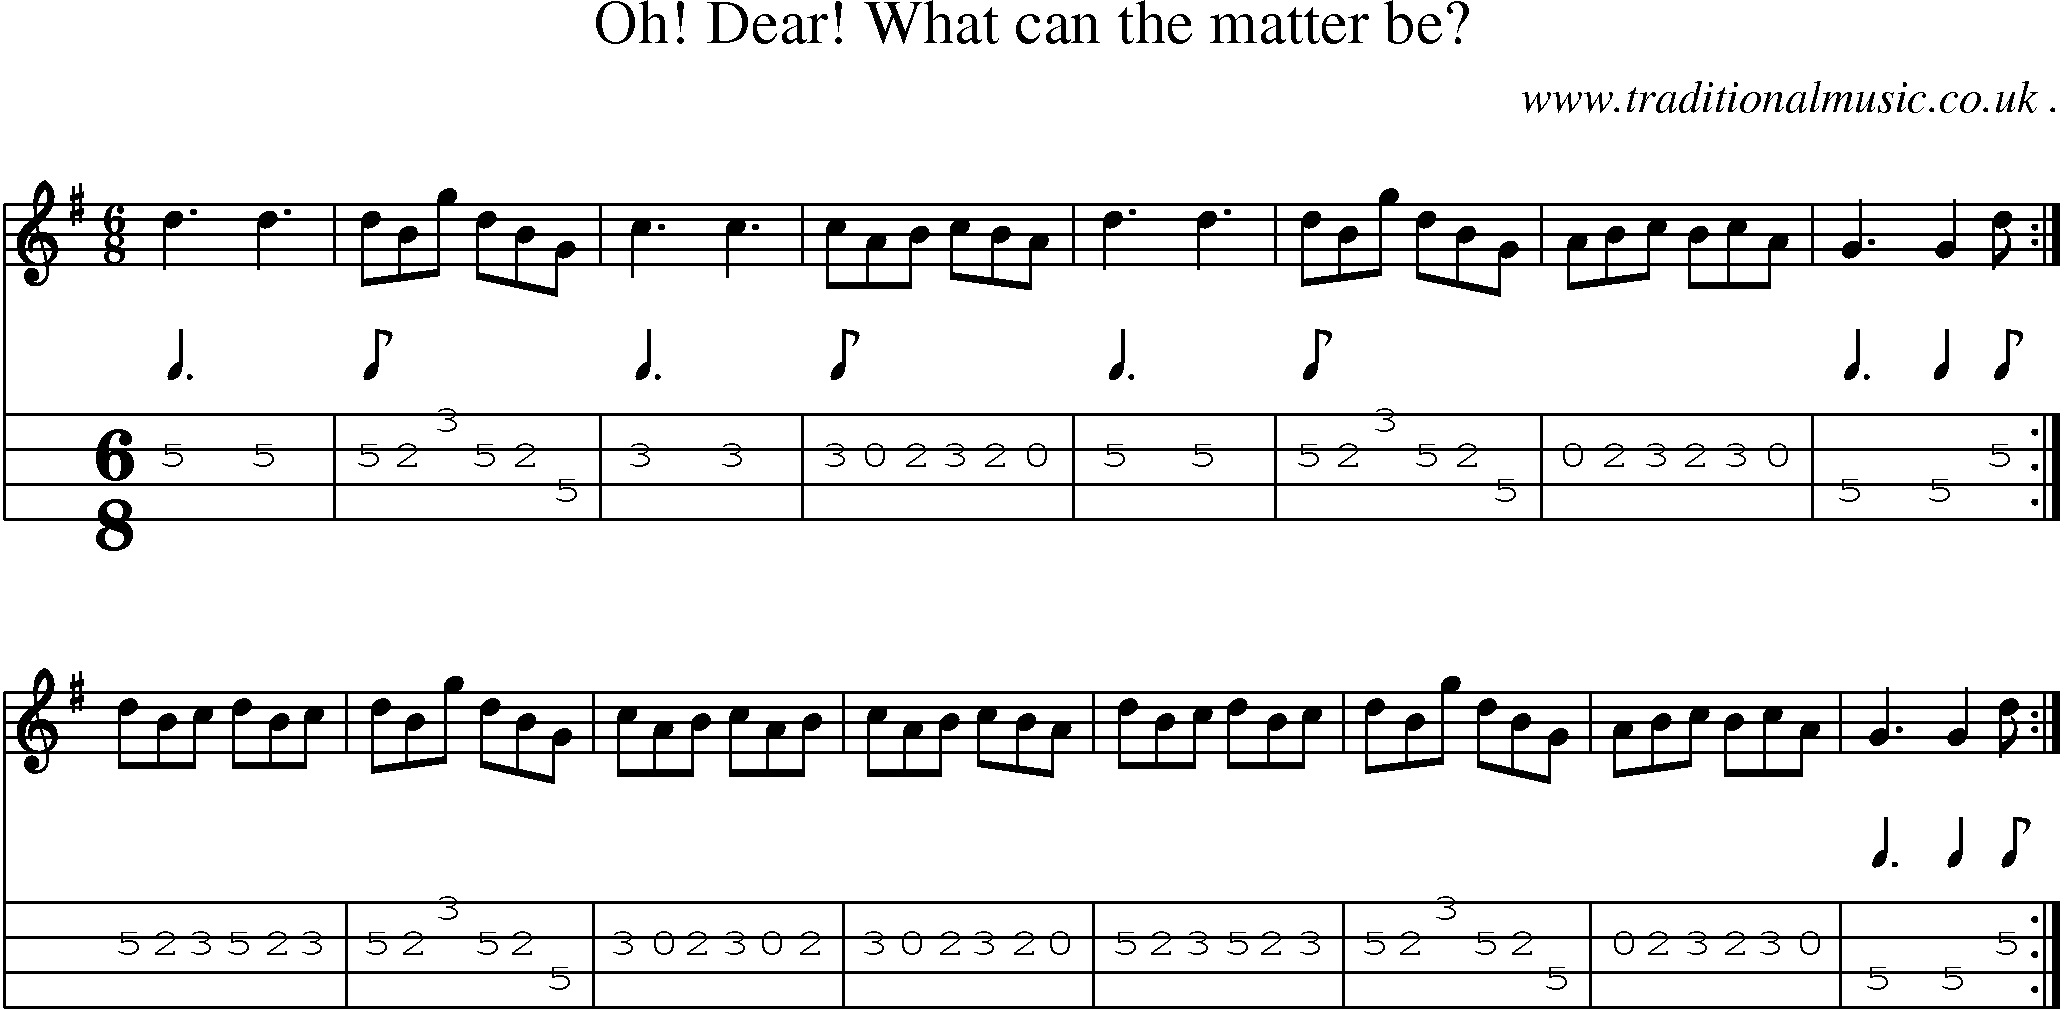 Music Score and Guitar Tabs for Oh! Dear! What can the matter be